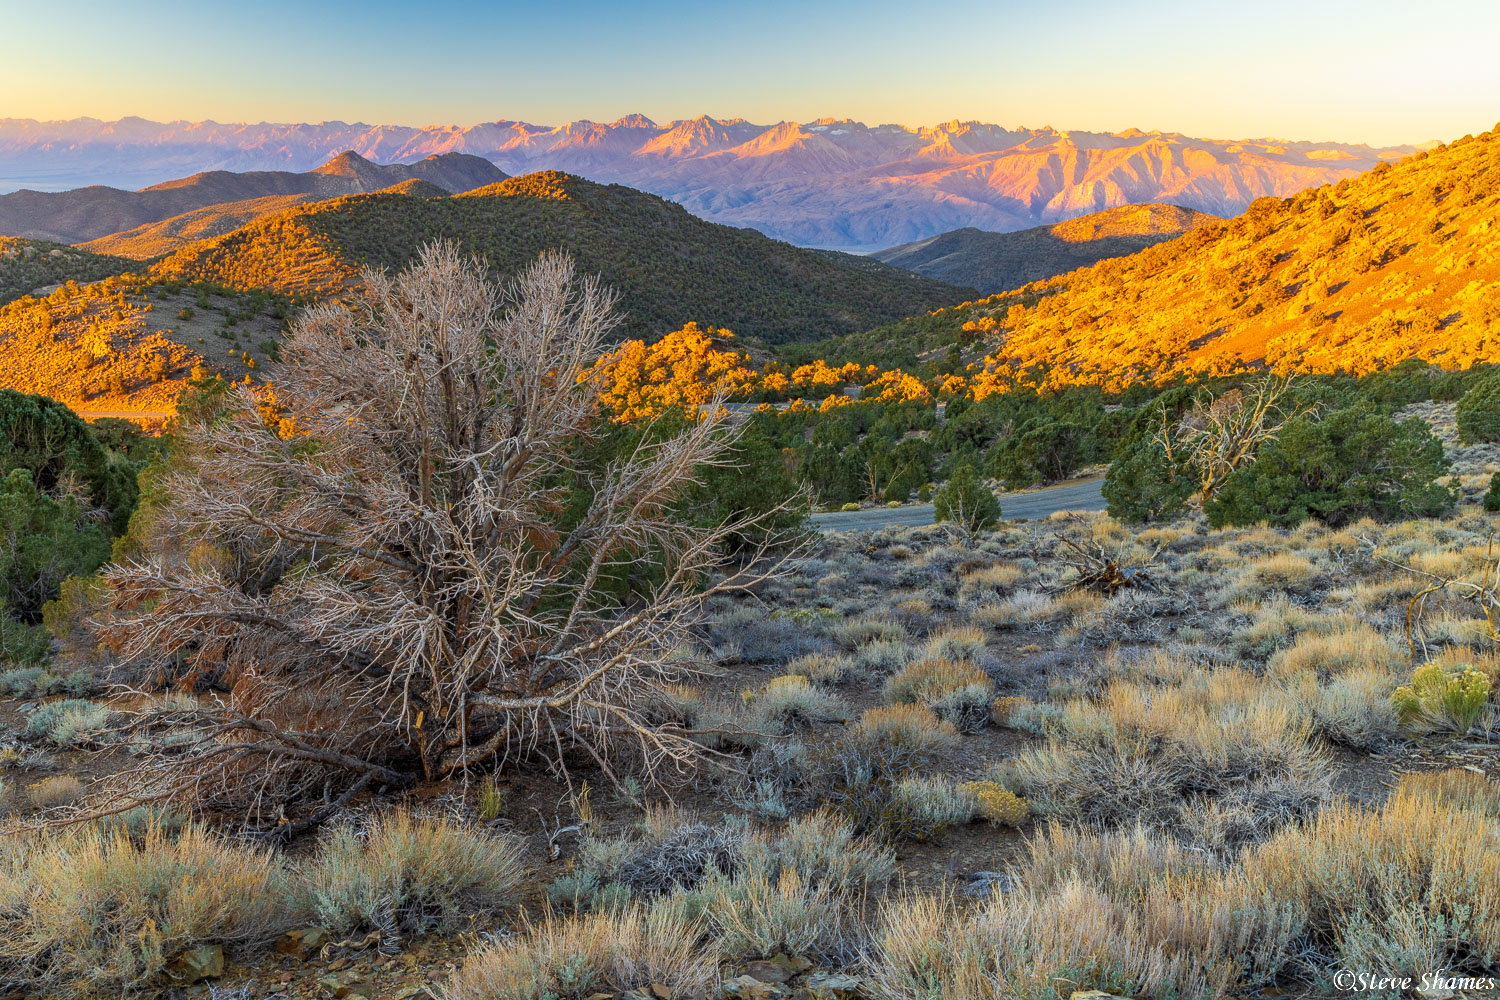 Sunrise on the road leading to the Bristlecone Pine forest. The purple mountains in the distance are the Sierras.